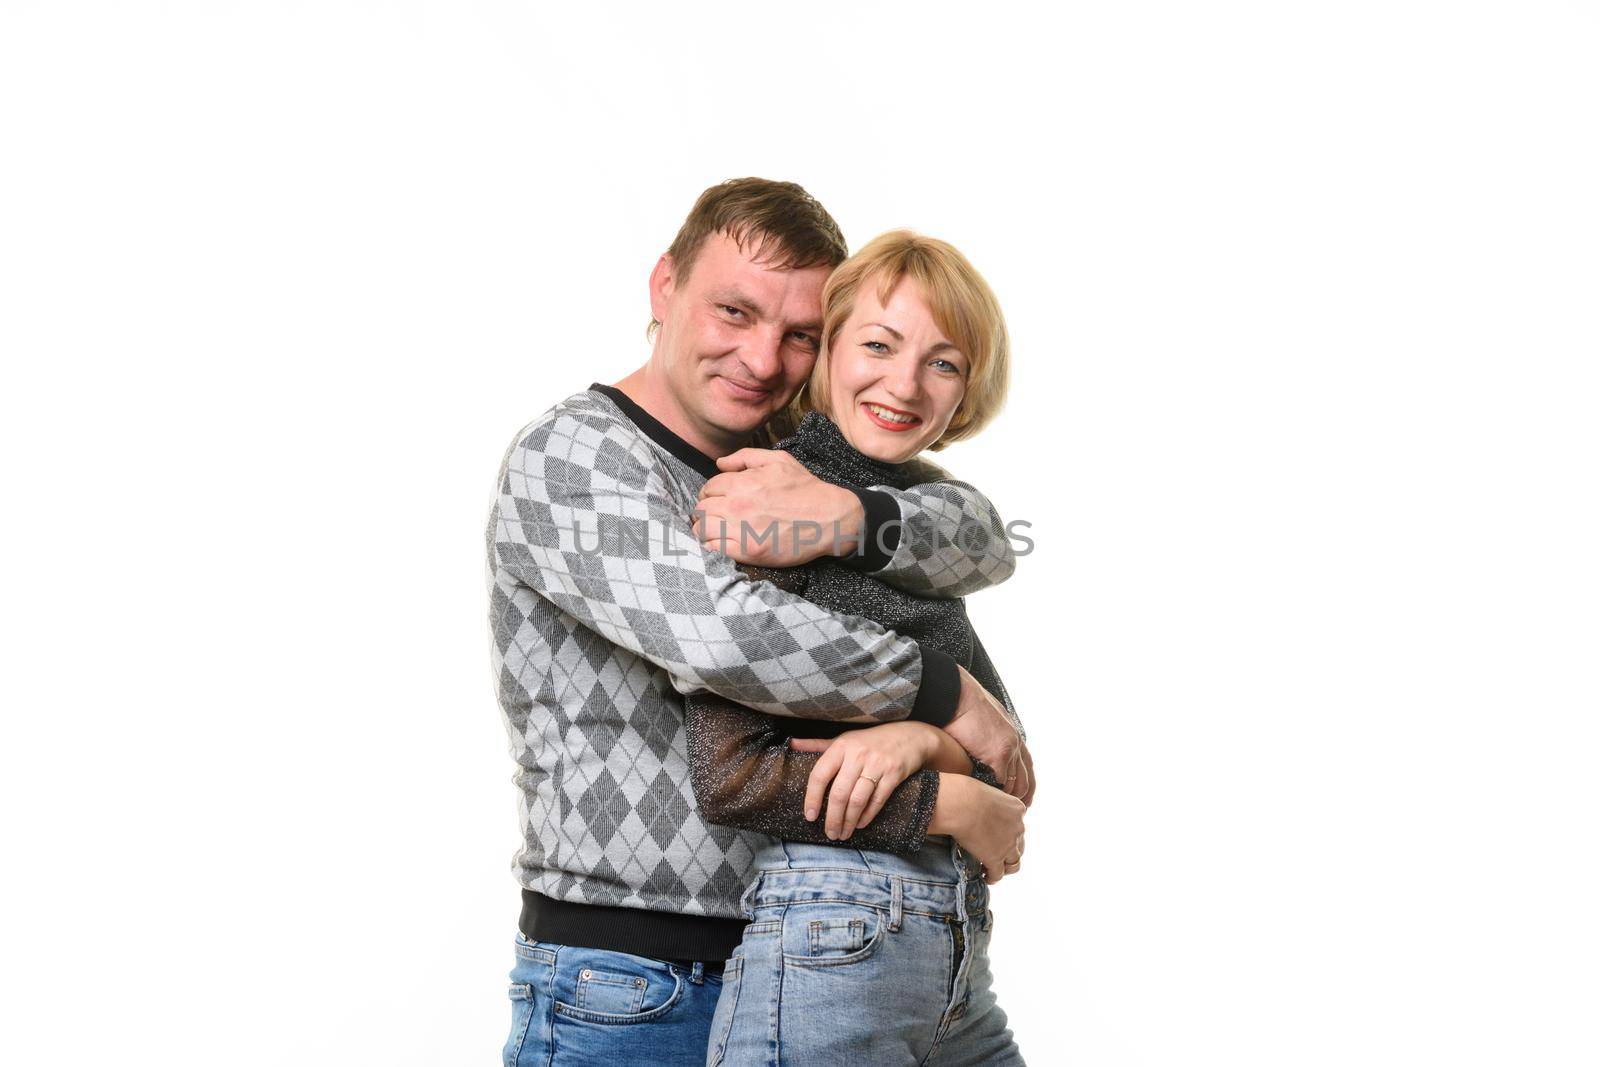 Man hugging woman, isolated on white background by Madhourse